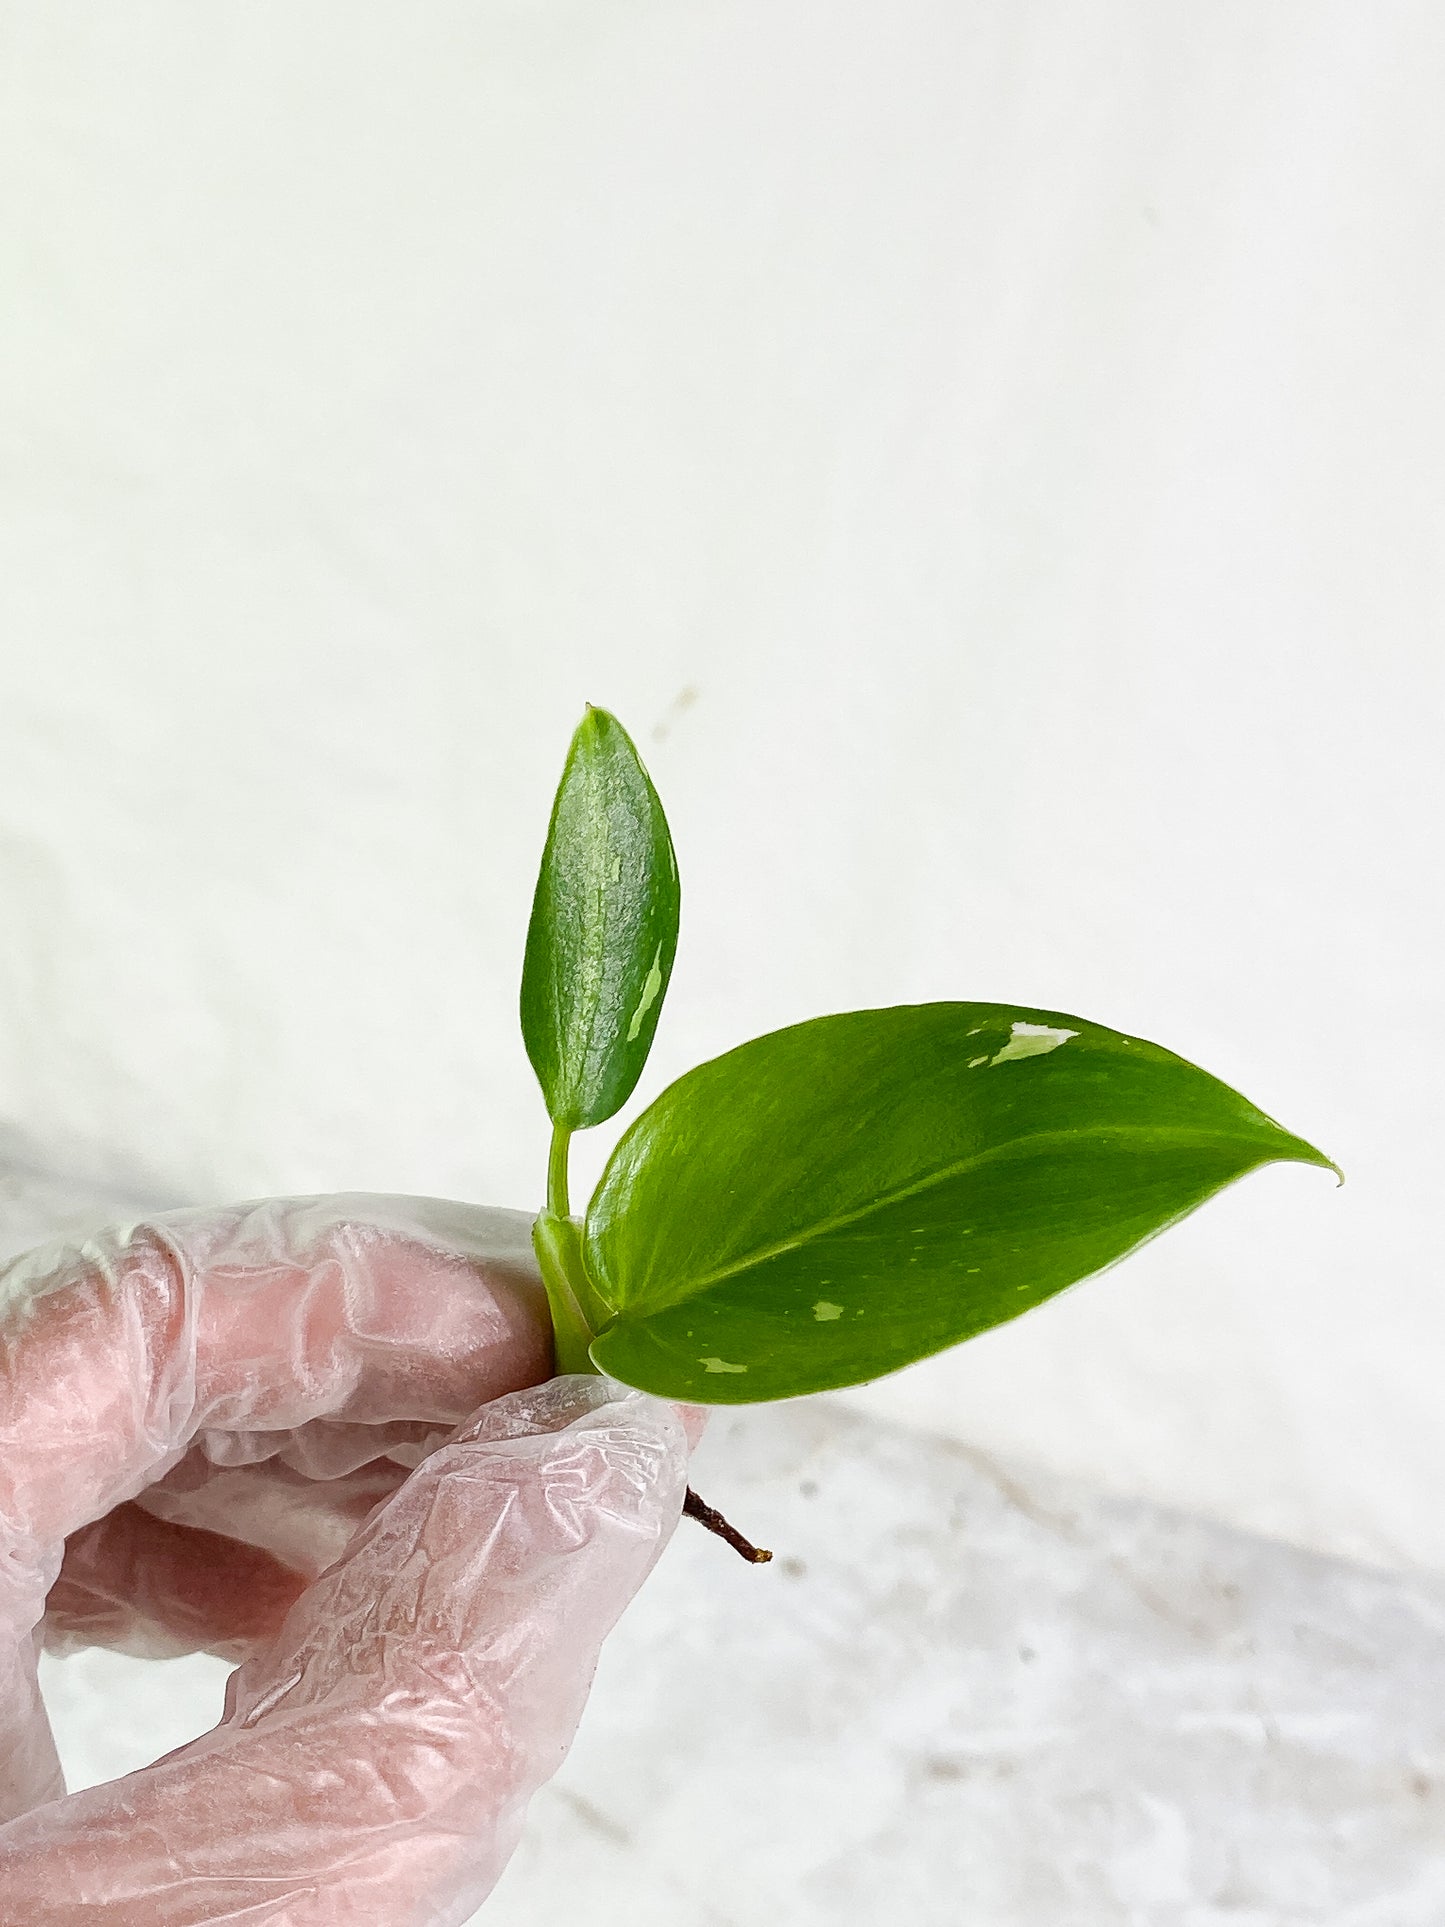 Philodendron white wizard 2 baby leaves unrooted